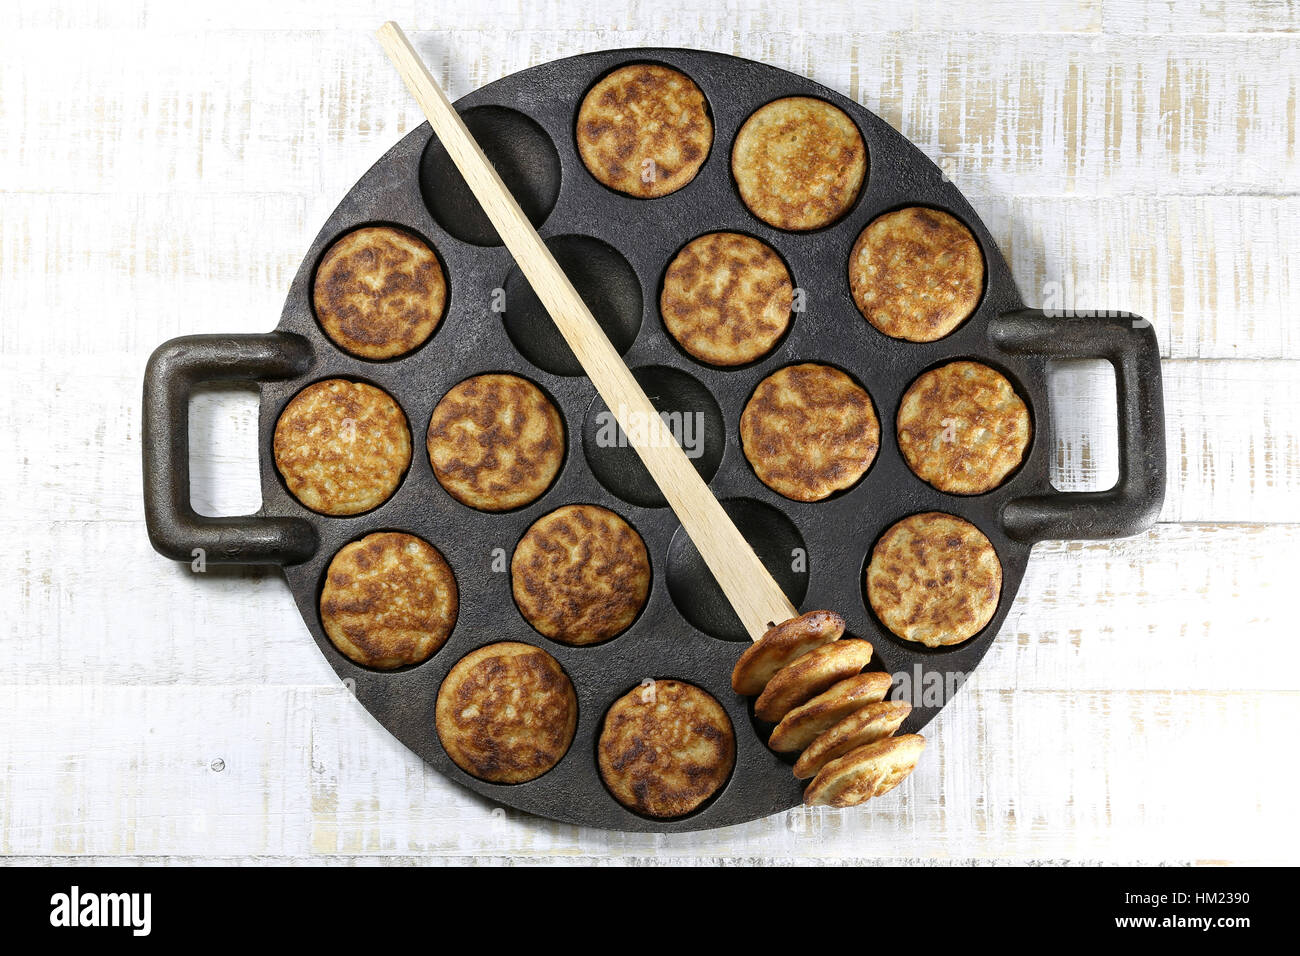 https://c8.alamy.com/comp/HM2390/homemade-dutch-poffertjes-in-a-traditional-cast-iron-pan-on-wooden-HM2390.jpg